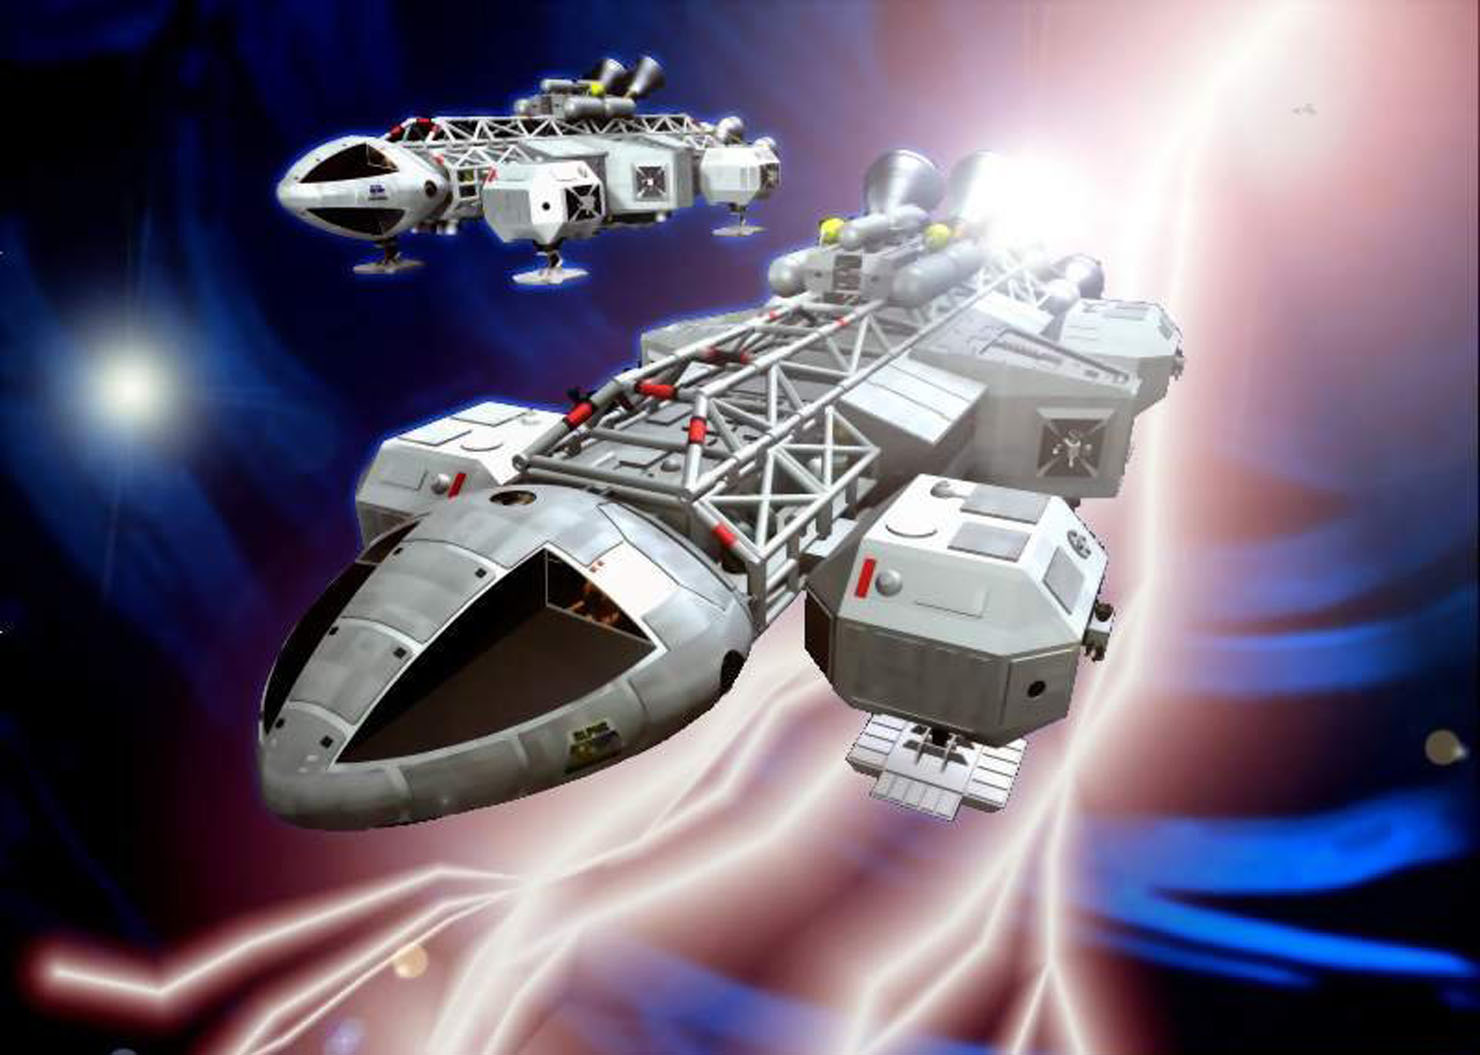 Space Fiction Spaceships Vehicles Spaceship HD Wallpaper Of